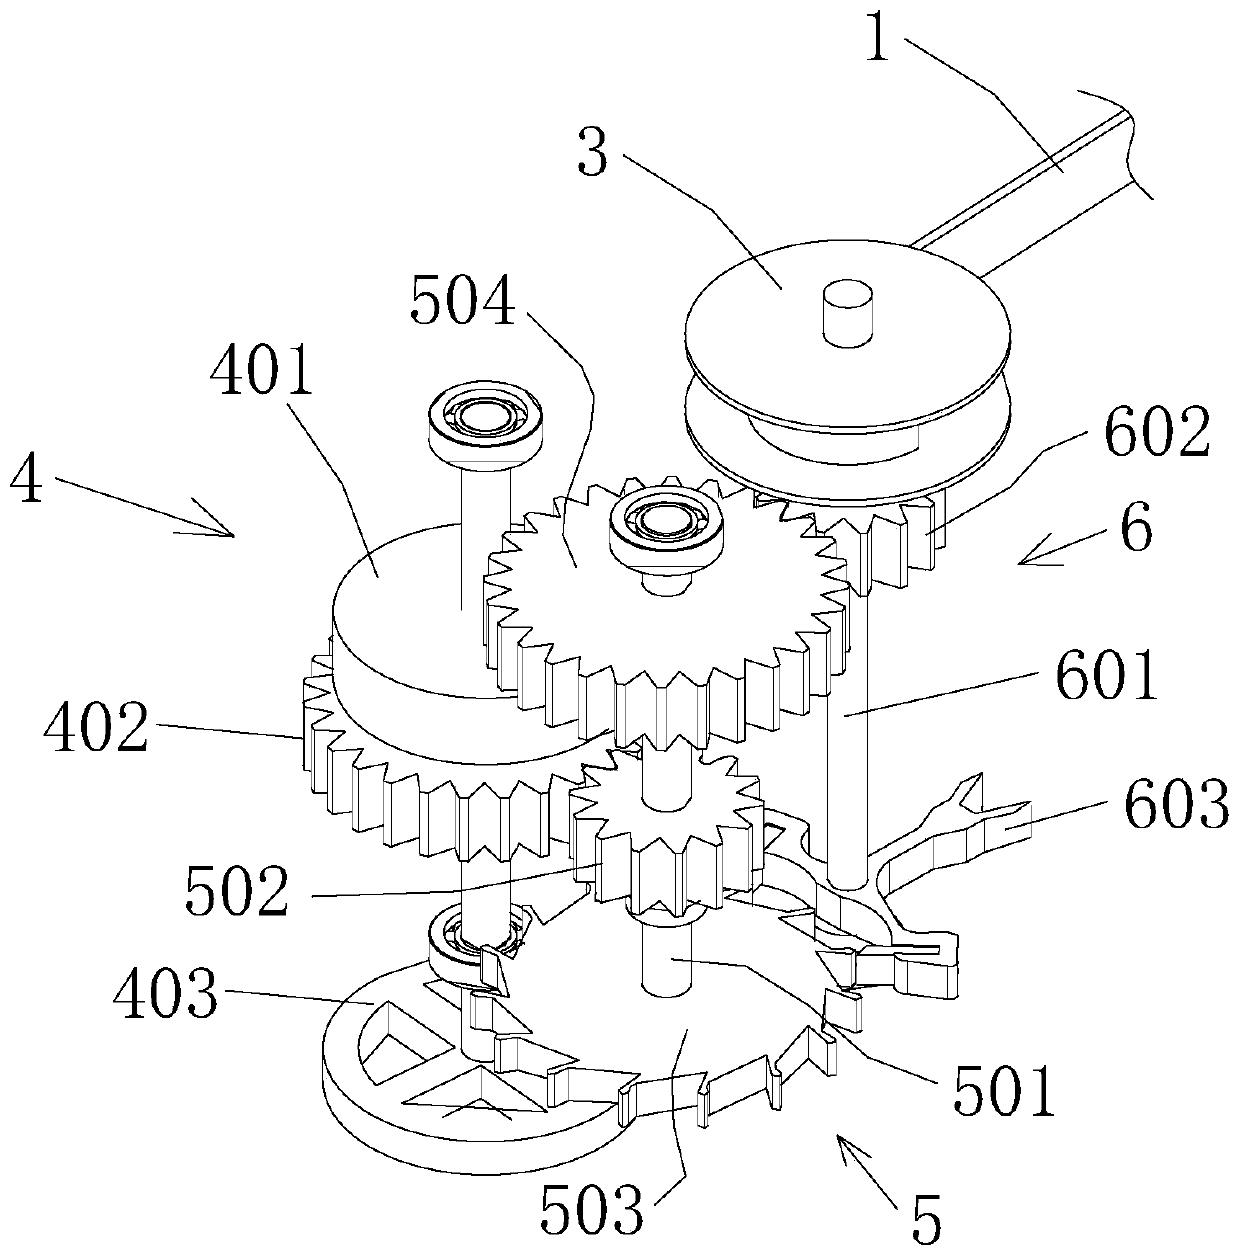 An automatic device and working method for automatically collecting animal hair